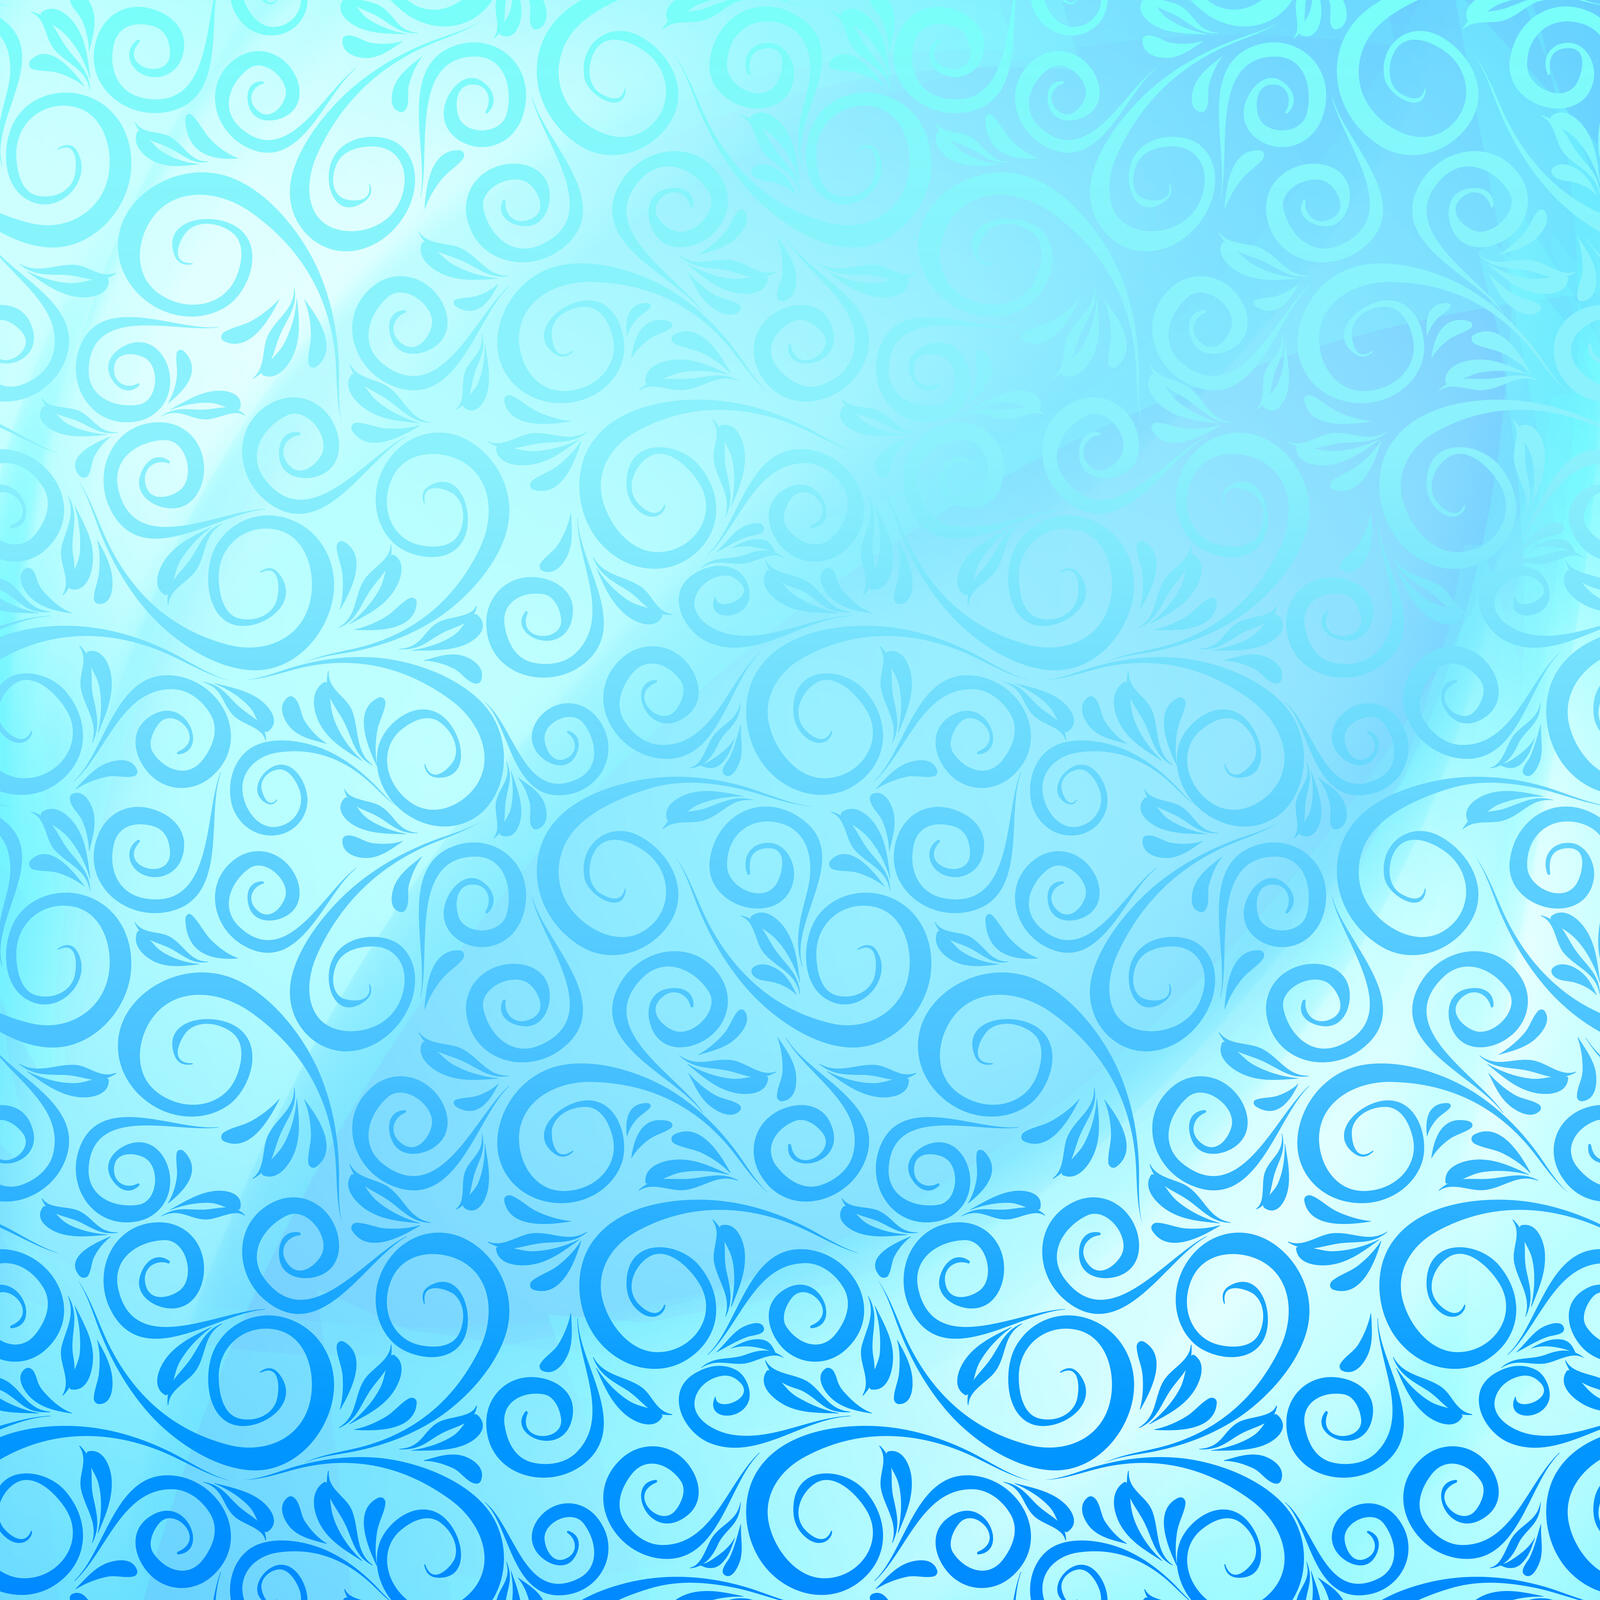 Wallpapers sky blue background textures on the desktop